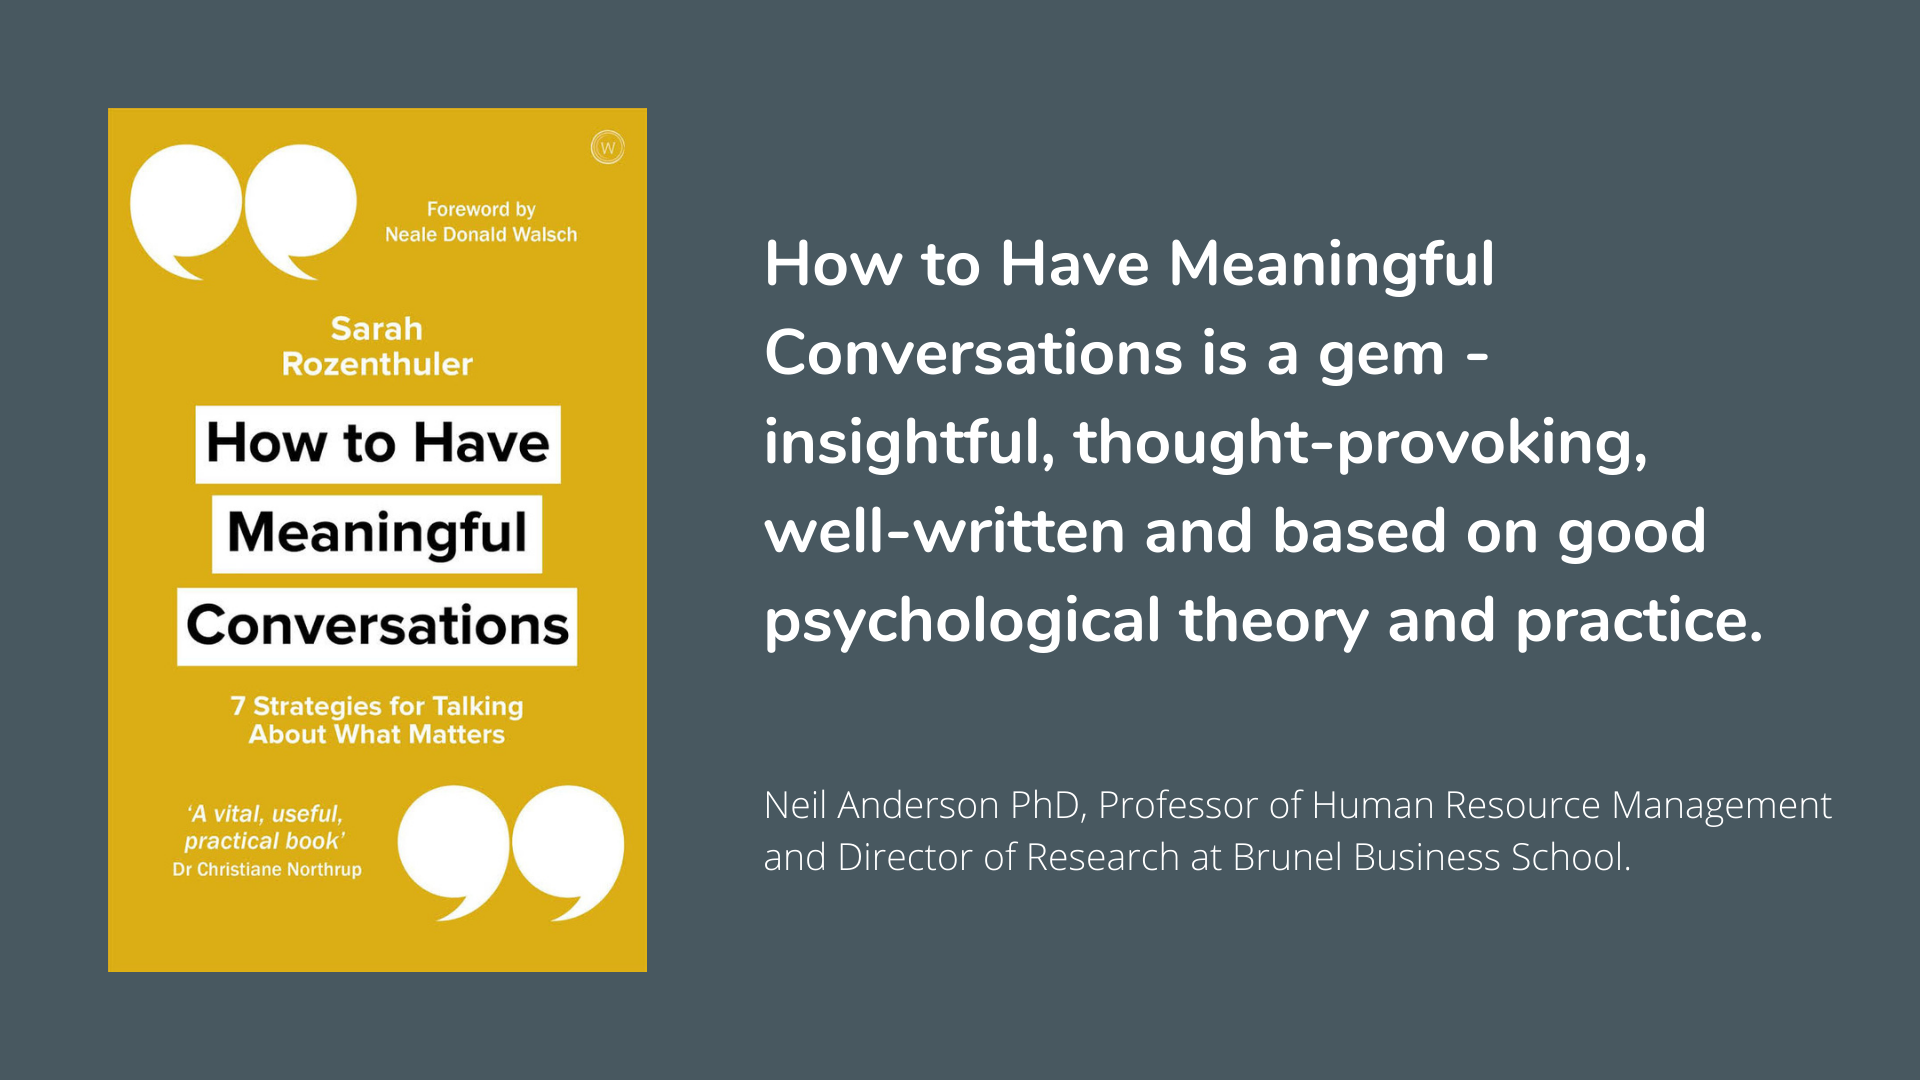 How to Have Meaningful Conversations